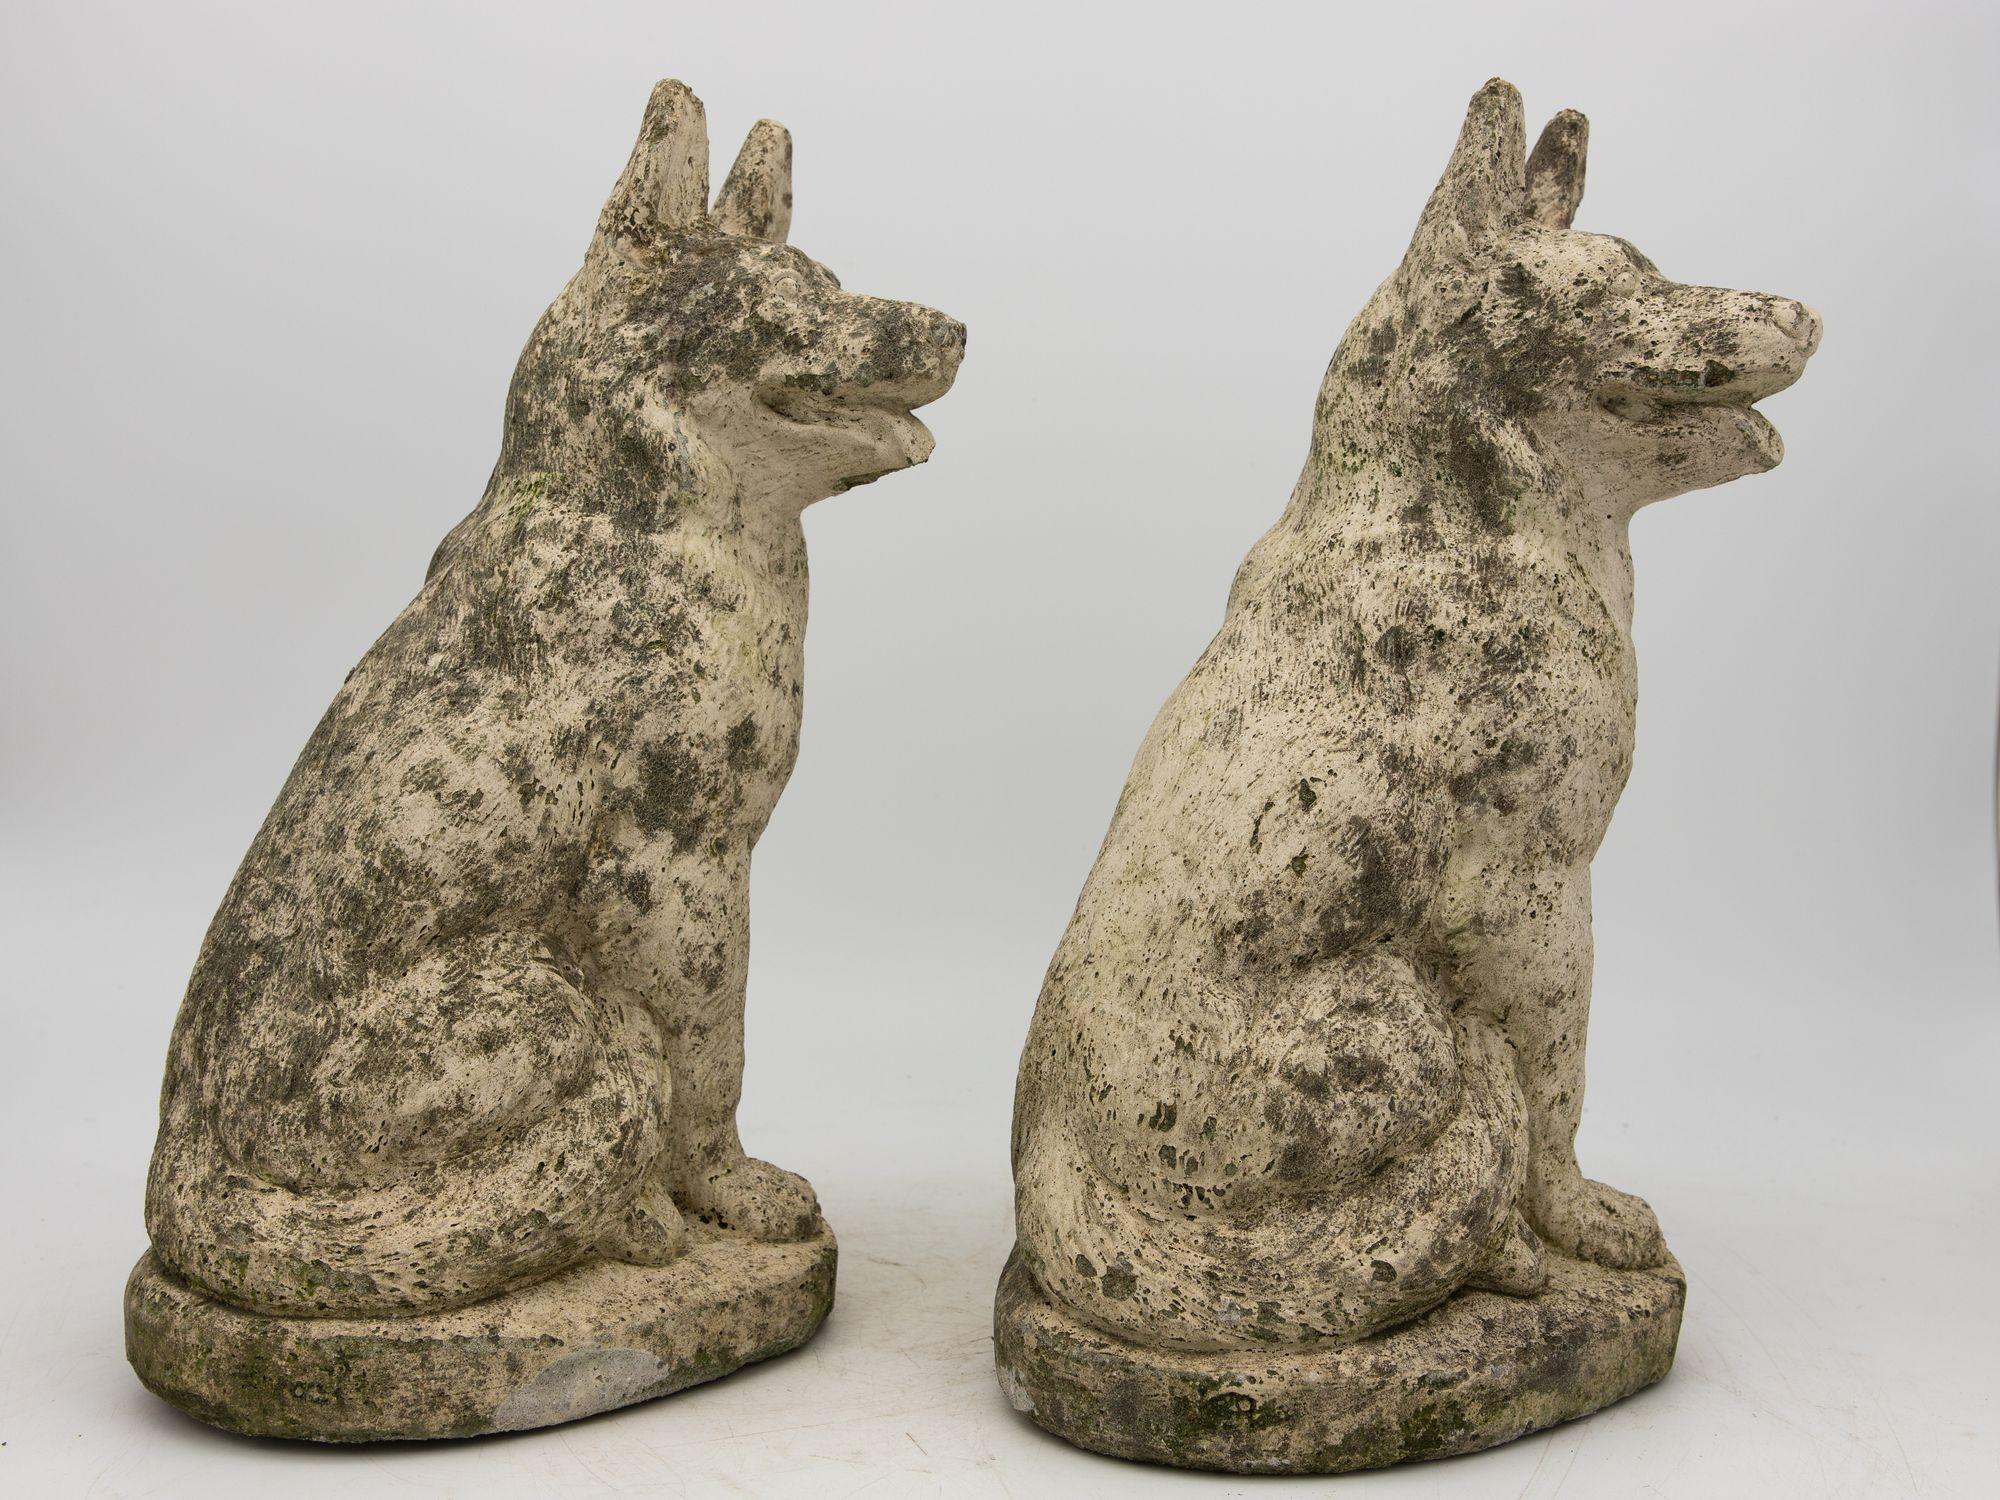 This exquisite pair of mid-20th-century concrete dogs, painted in a weathered white finish, exudes timeless elegance with an honest patina. Crafted in England, they take the form of small shepherds, their alert expressions beautifully captured with